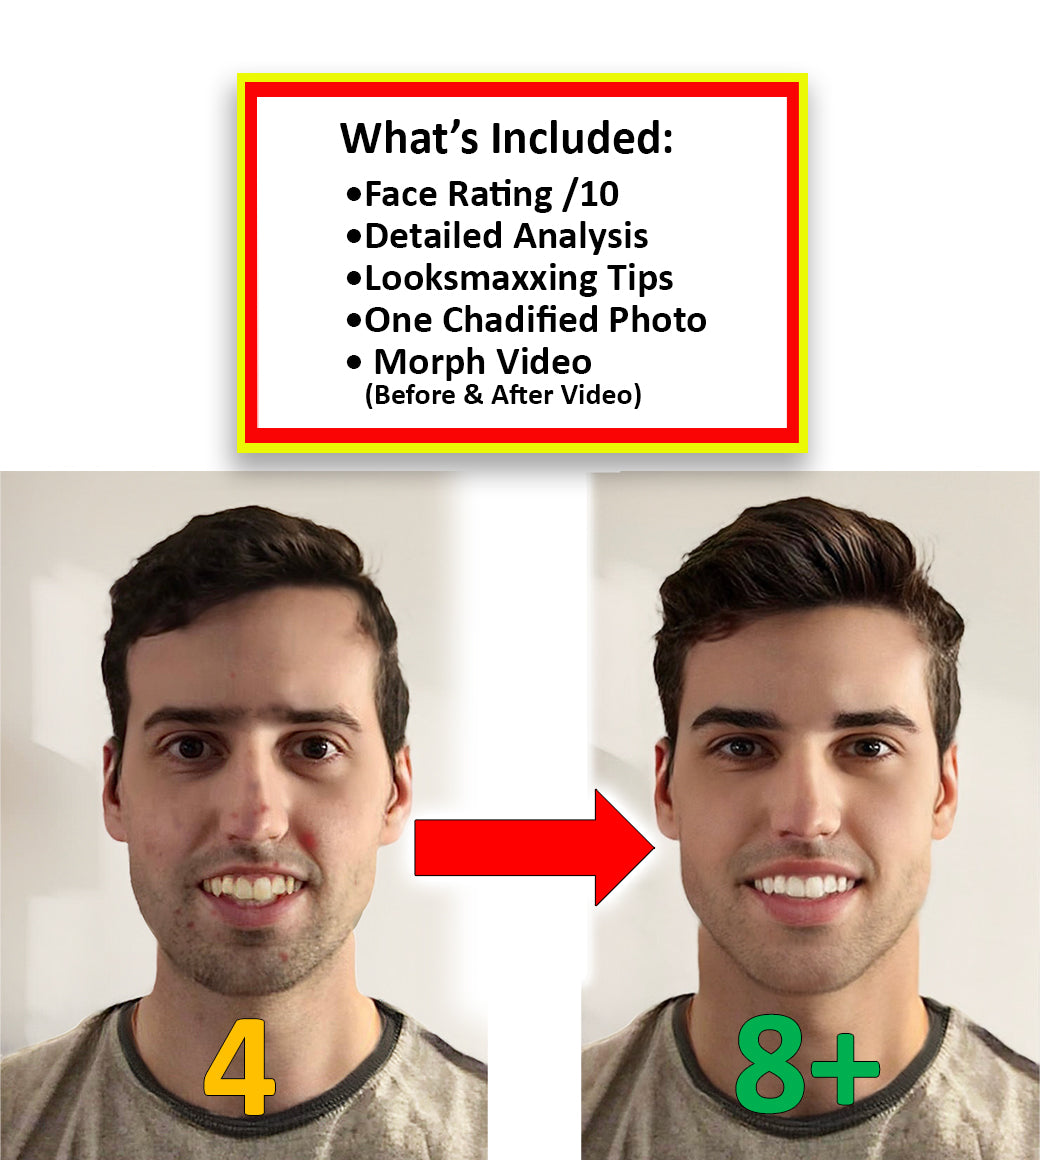 Face Rating, Analysis, Looksmaxxing, Chadification